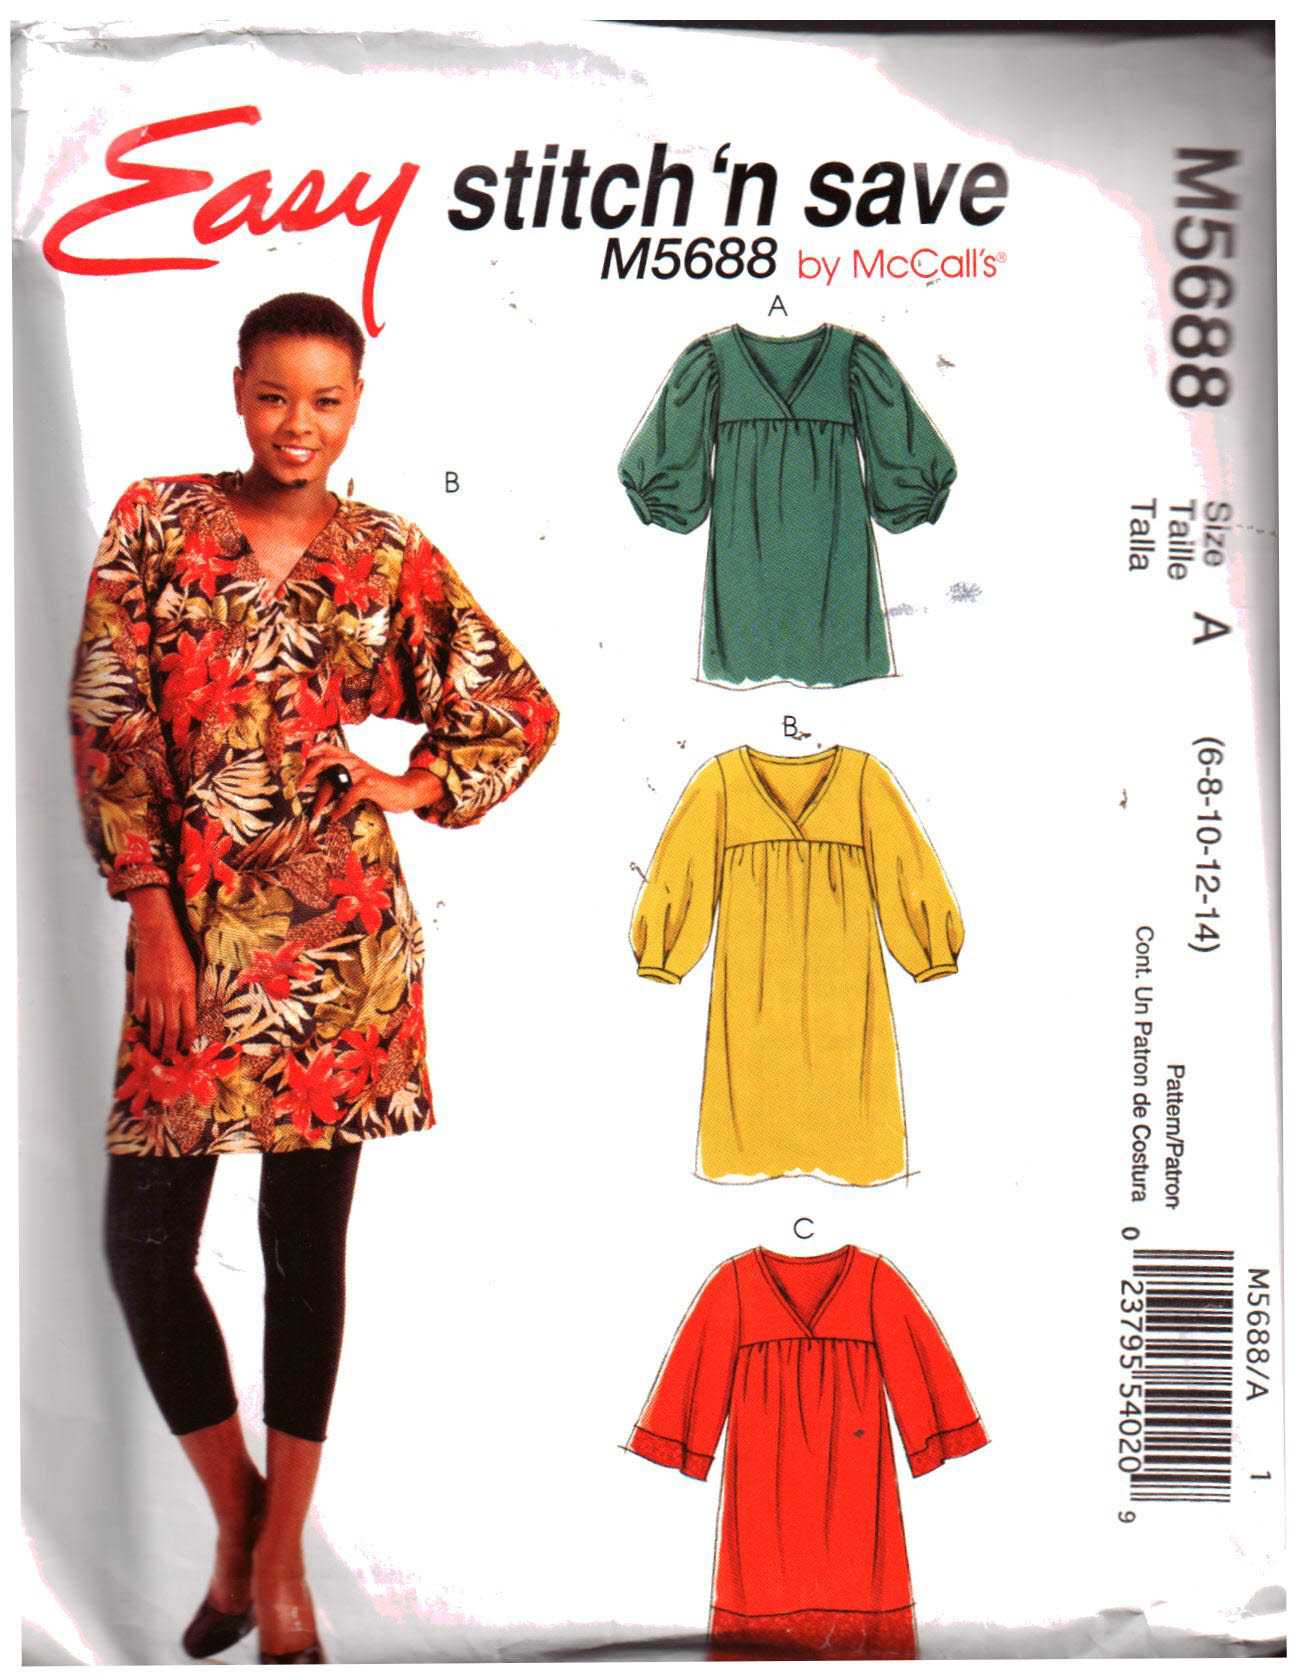 McCall's M5688 Dress Size: A 6-8-10-12-14 Used Sewing Pattern